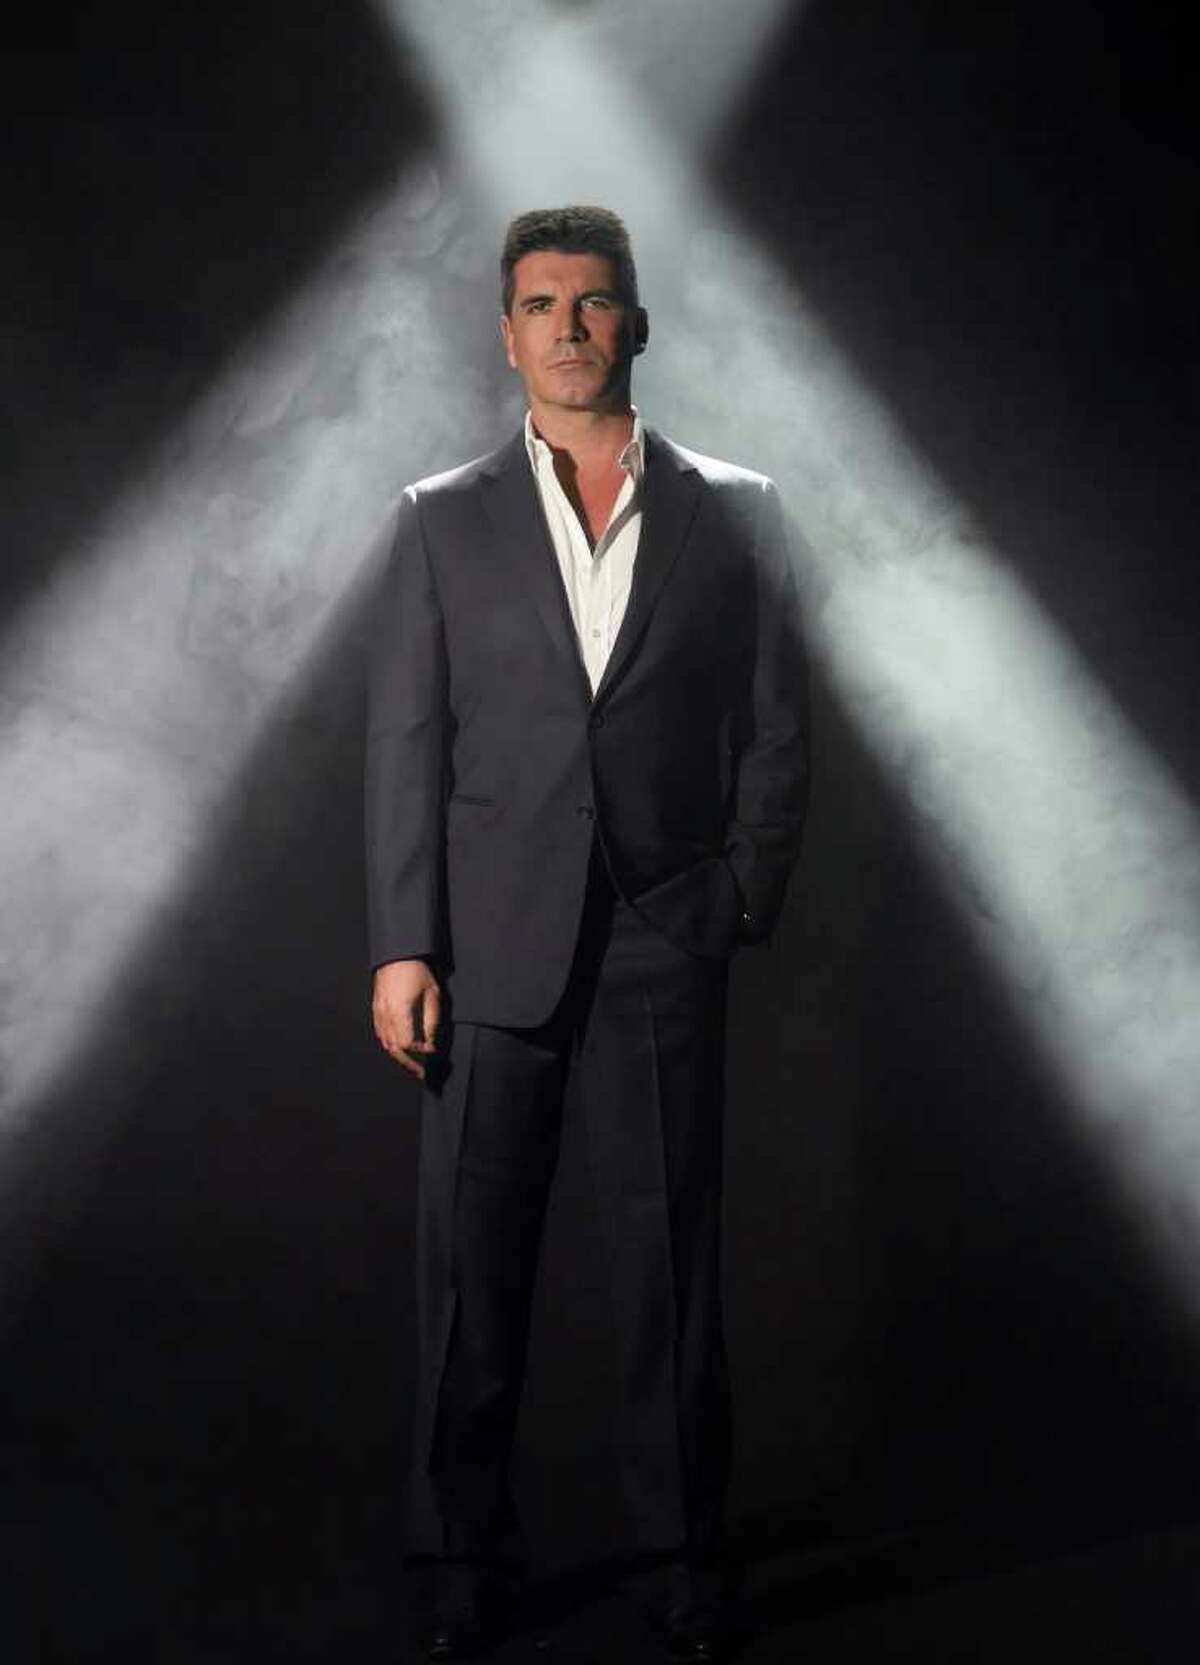 In this undated publicity photo released by Fox, Simon Cowell, from "The X Factor," is shown. Fox, as part of its new season schedule announcement on Monday, May 16, 2011, said it will introduce eight new series next year. They include Simon Cowell's talent show "The X Factor," which was given time slots in the fall similar to "American Idol." (AP Photo/Fox, Ian Derry)